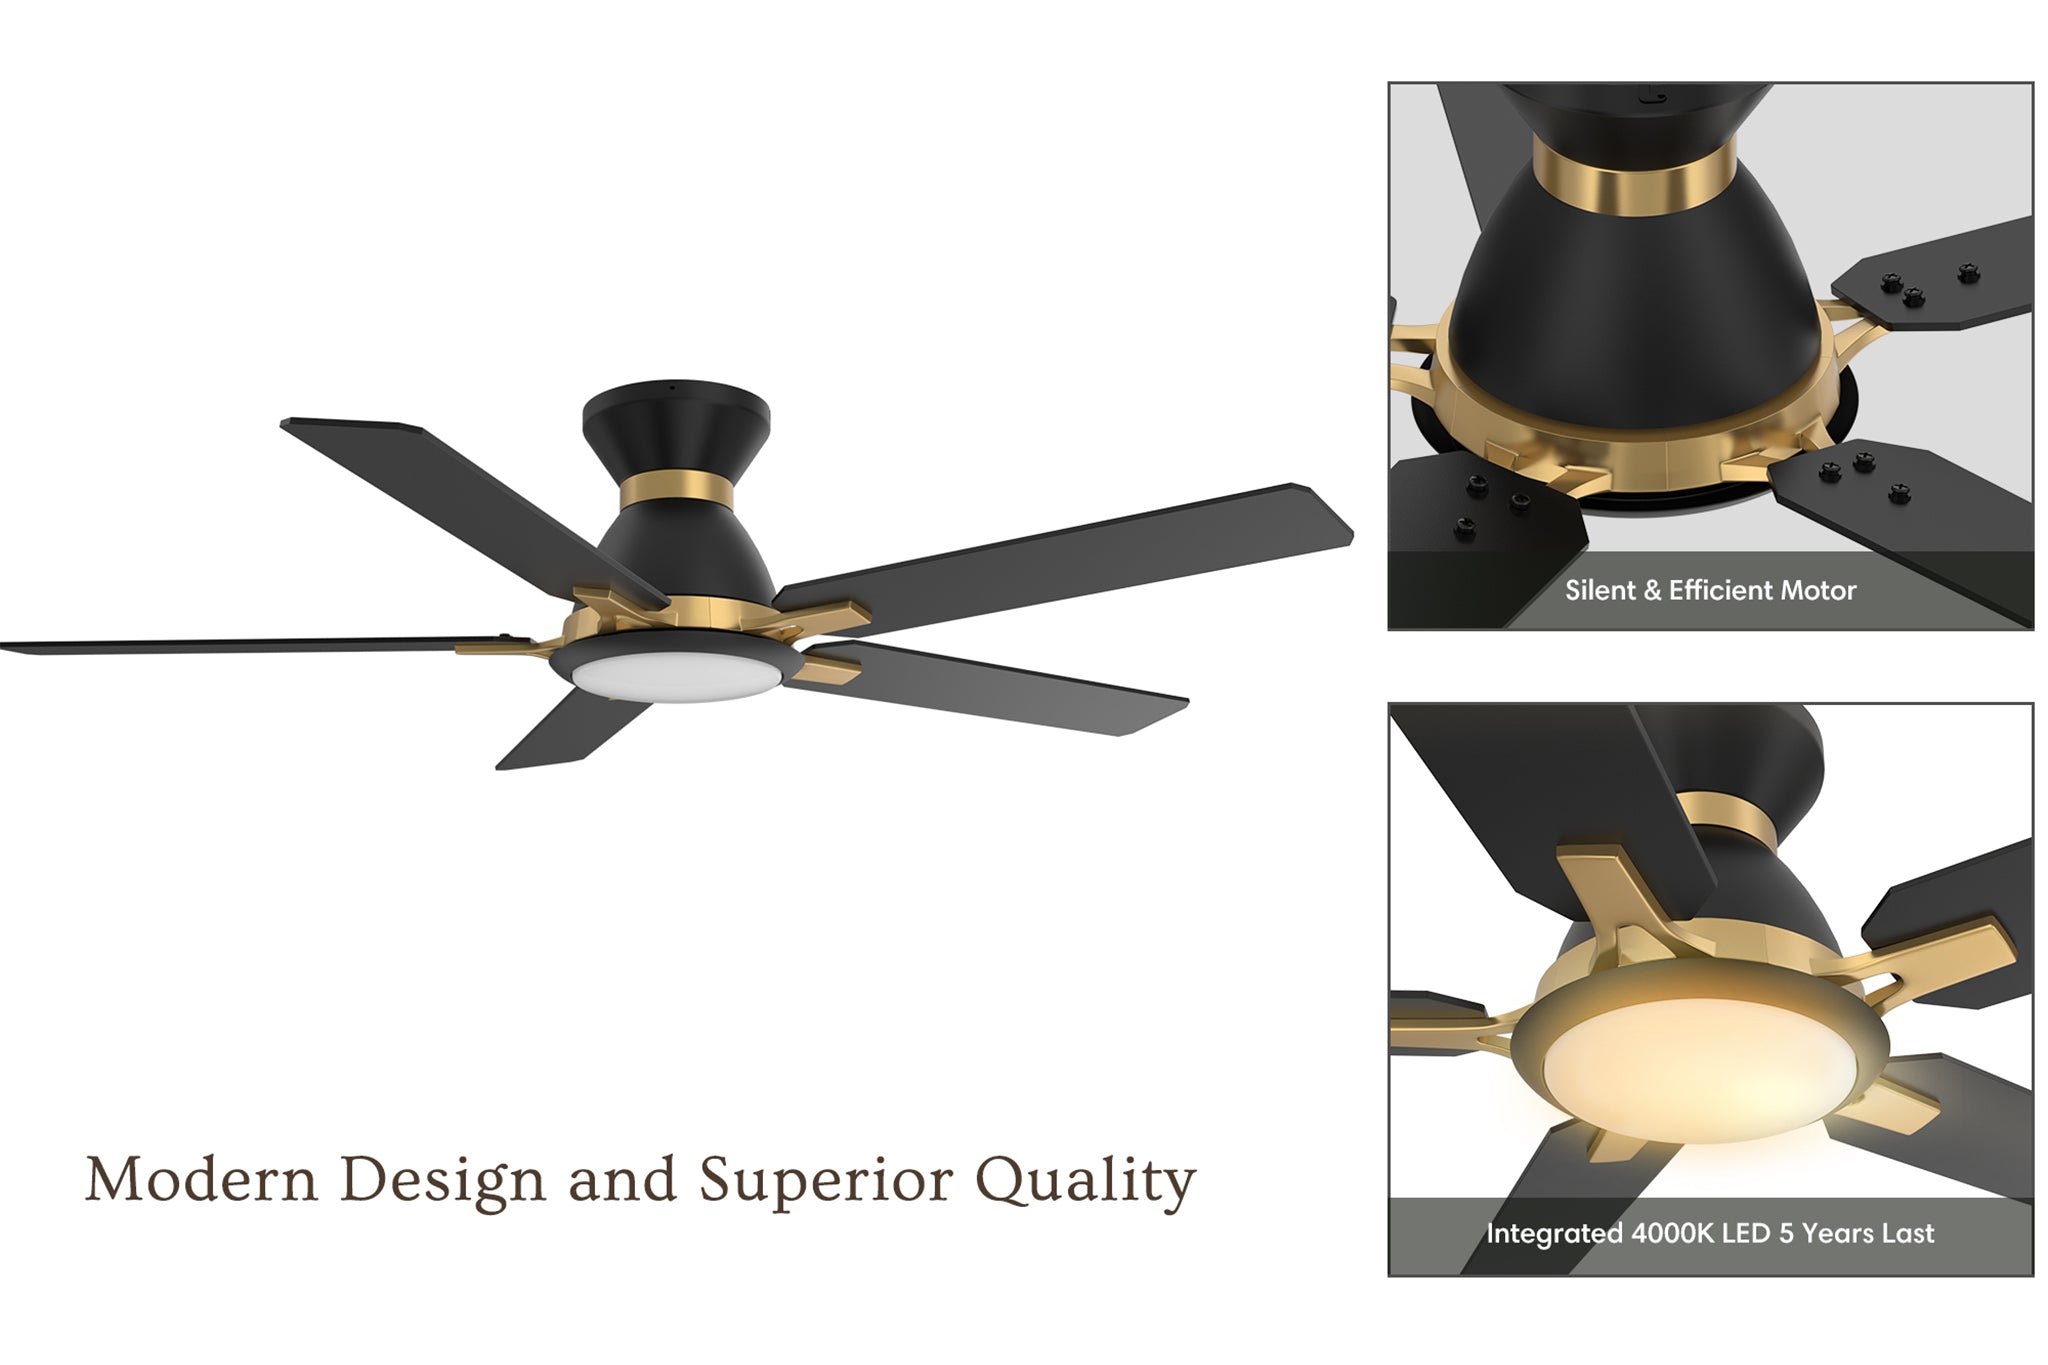 Carro-Smafan-Essex-10-speed-Ceiling-Fan-with-Remote-and-Reversible-Fan-Blades-brilliant-upscale-design-good-Reliable-Finest-Material